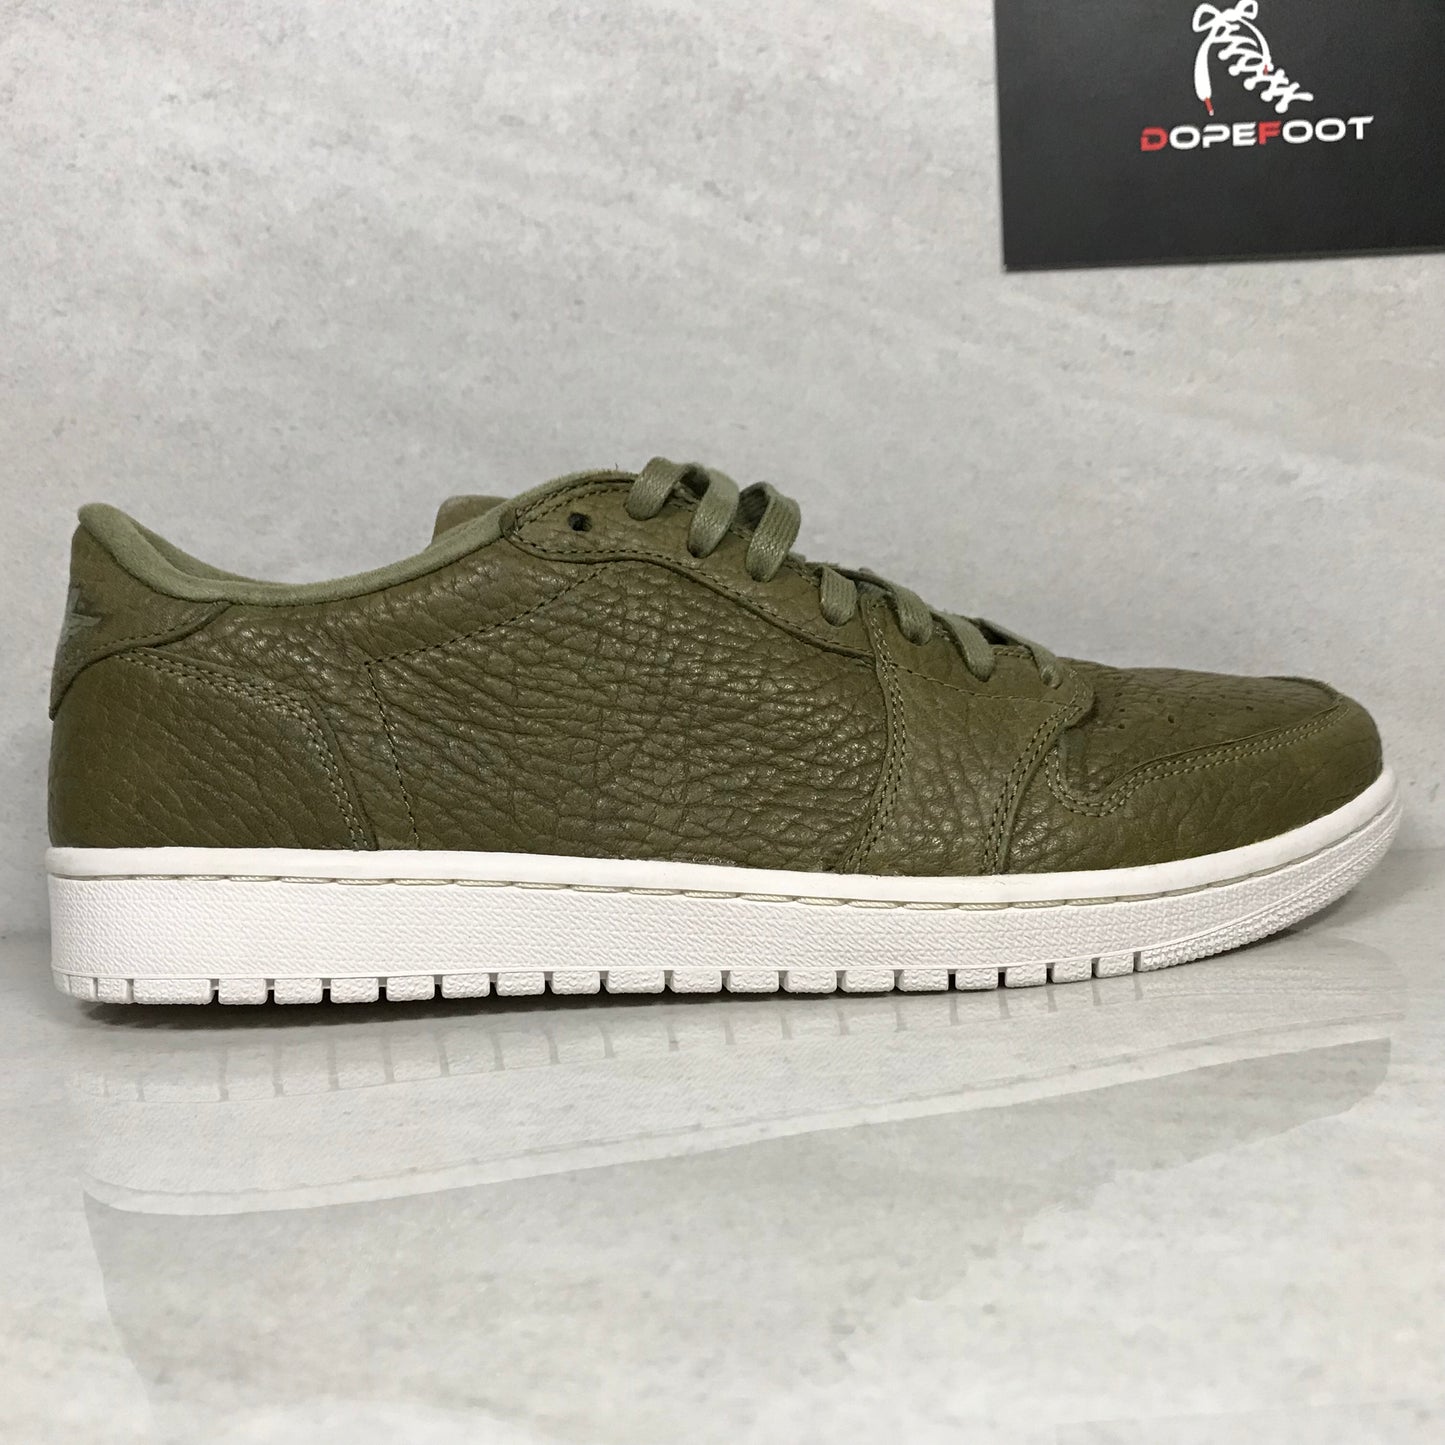 Air Jordan 1 I Retro Low Swooshless Trooper Olive Green - 848775 205 - Taille 8.5/Taille 10